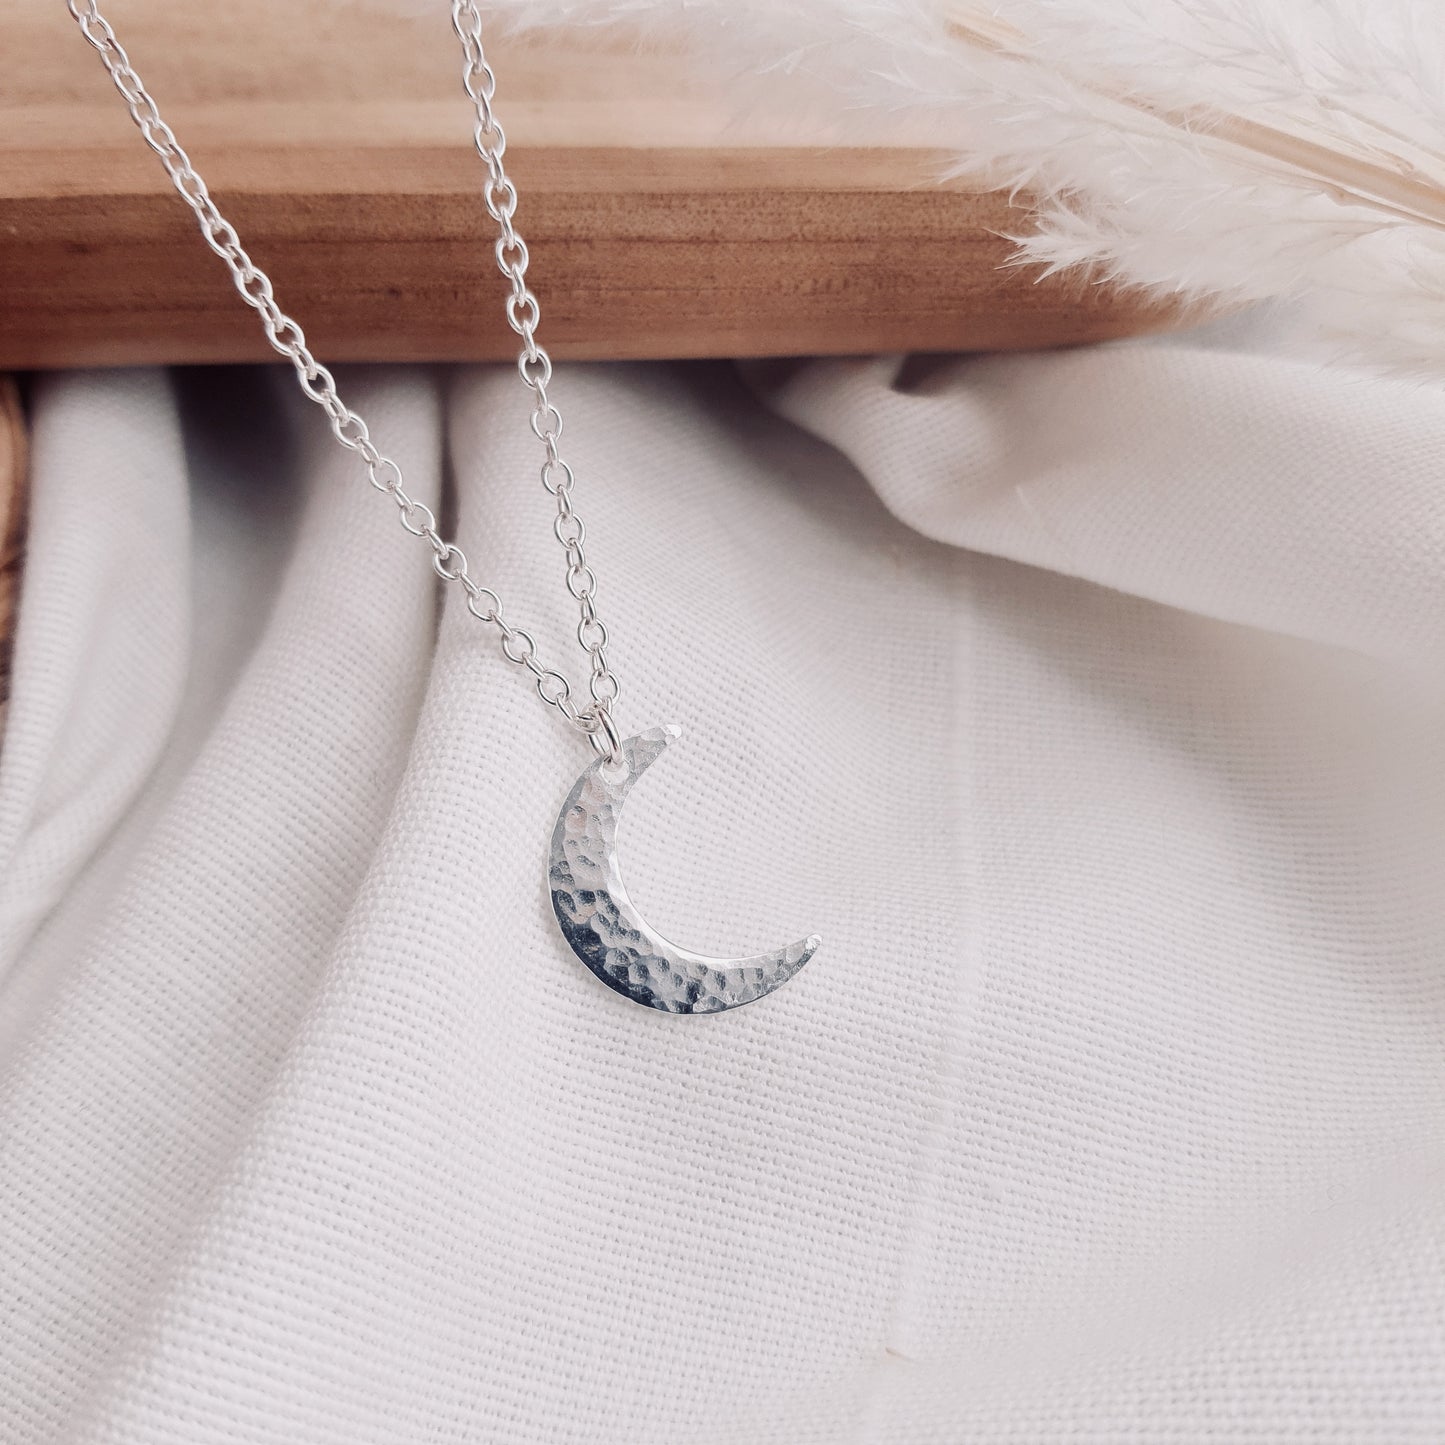 Large Silver Crescent Moon Necklace